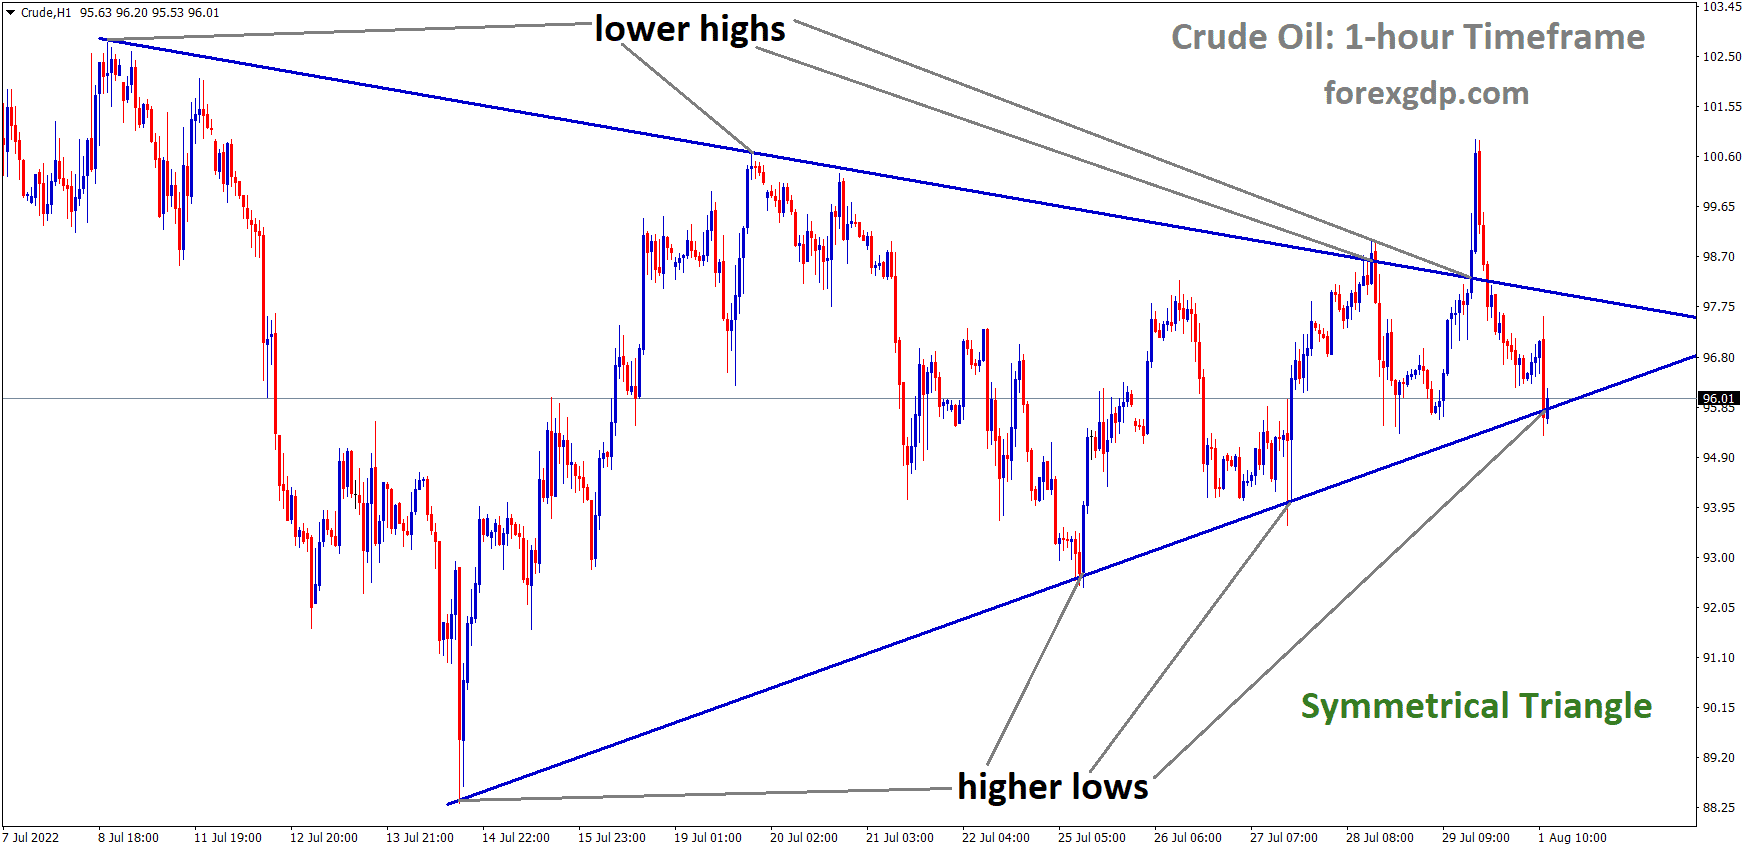 Crude Oil is moving in the Symmetrical triangle pattern and the market has reached the Bottom area of the Pattern